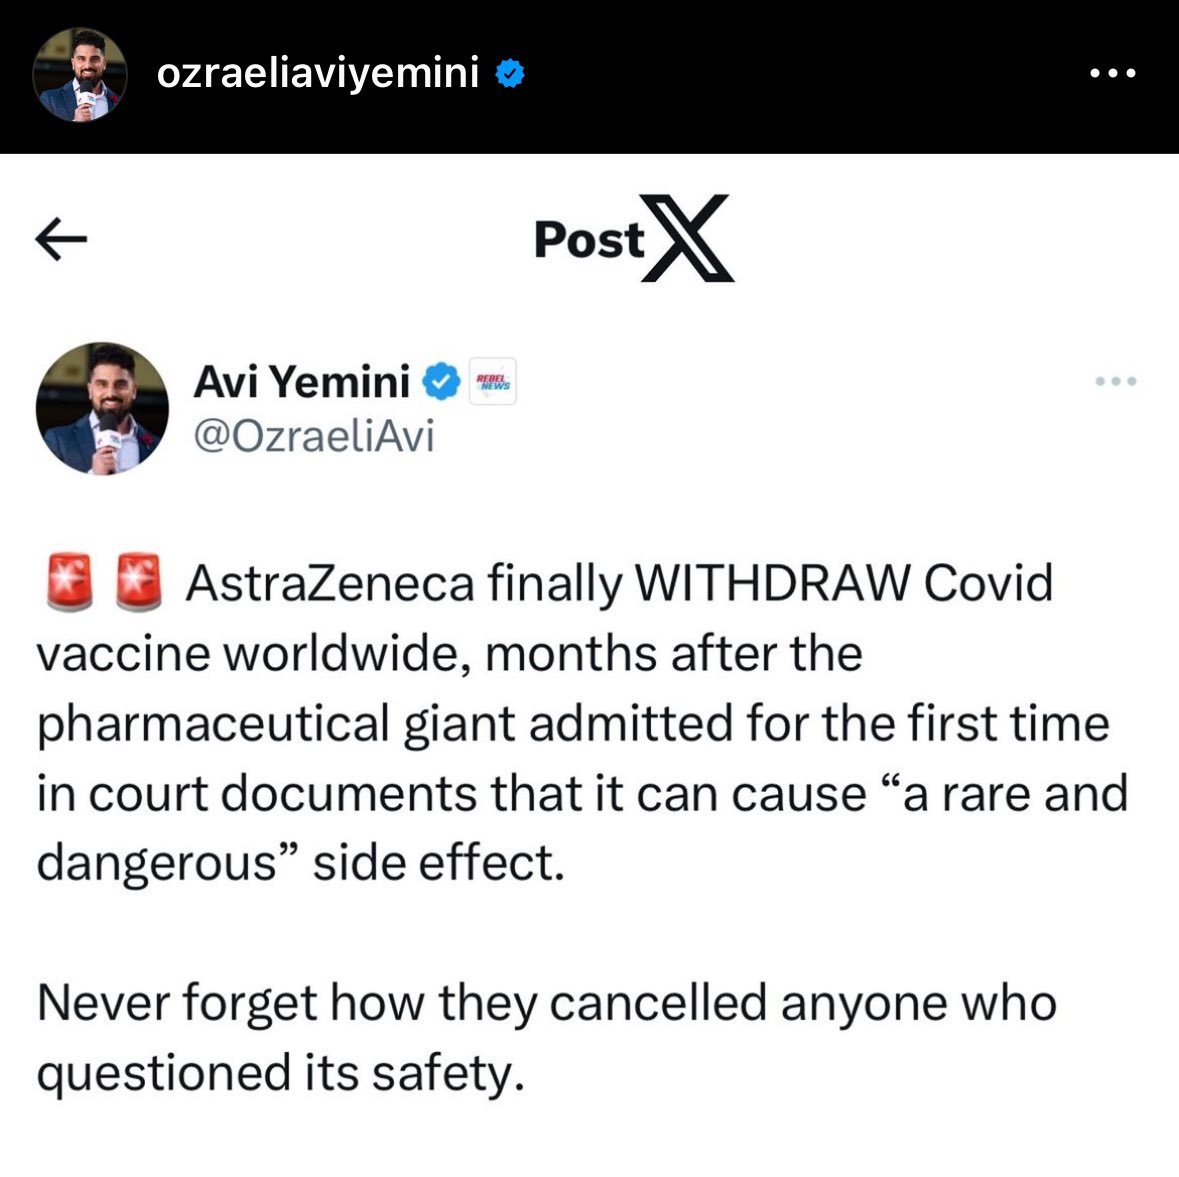 We told them so. Repeatedly. AstraZeneca’s Covid “vaccine” has been withdrawn globally AstraZeneca conceded that the “vaccine” can cause fatal blood clots & low platelet counts. The admission came through court documents in a UK class action lawsuit that sought £100 million…